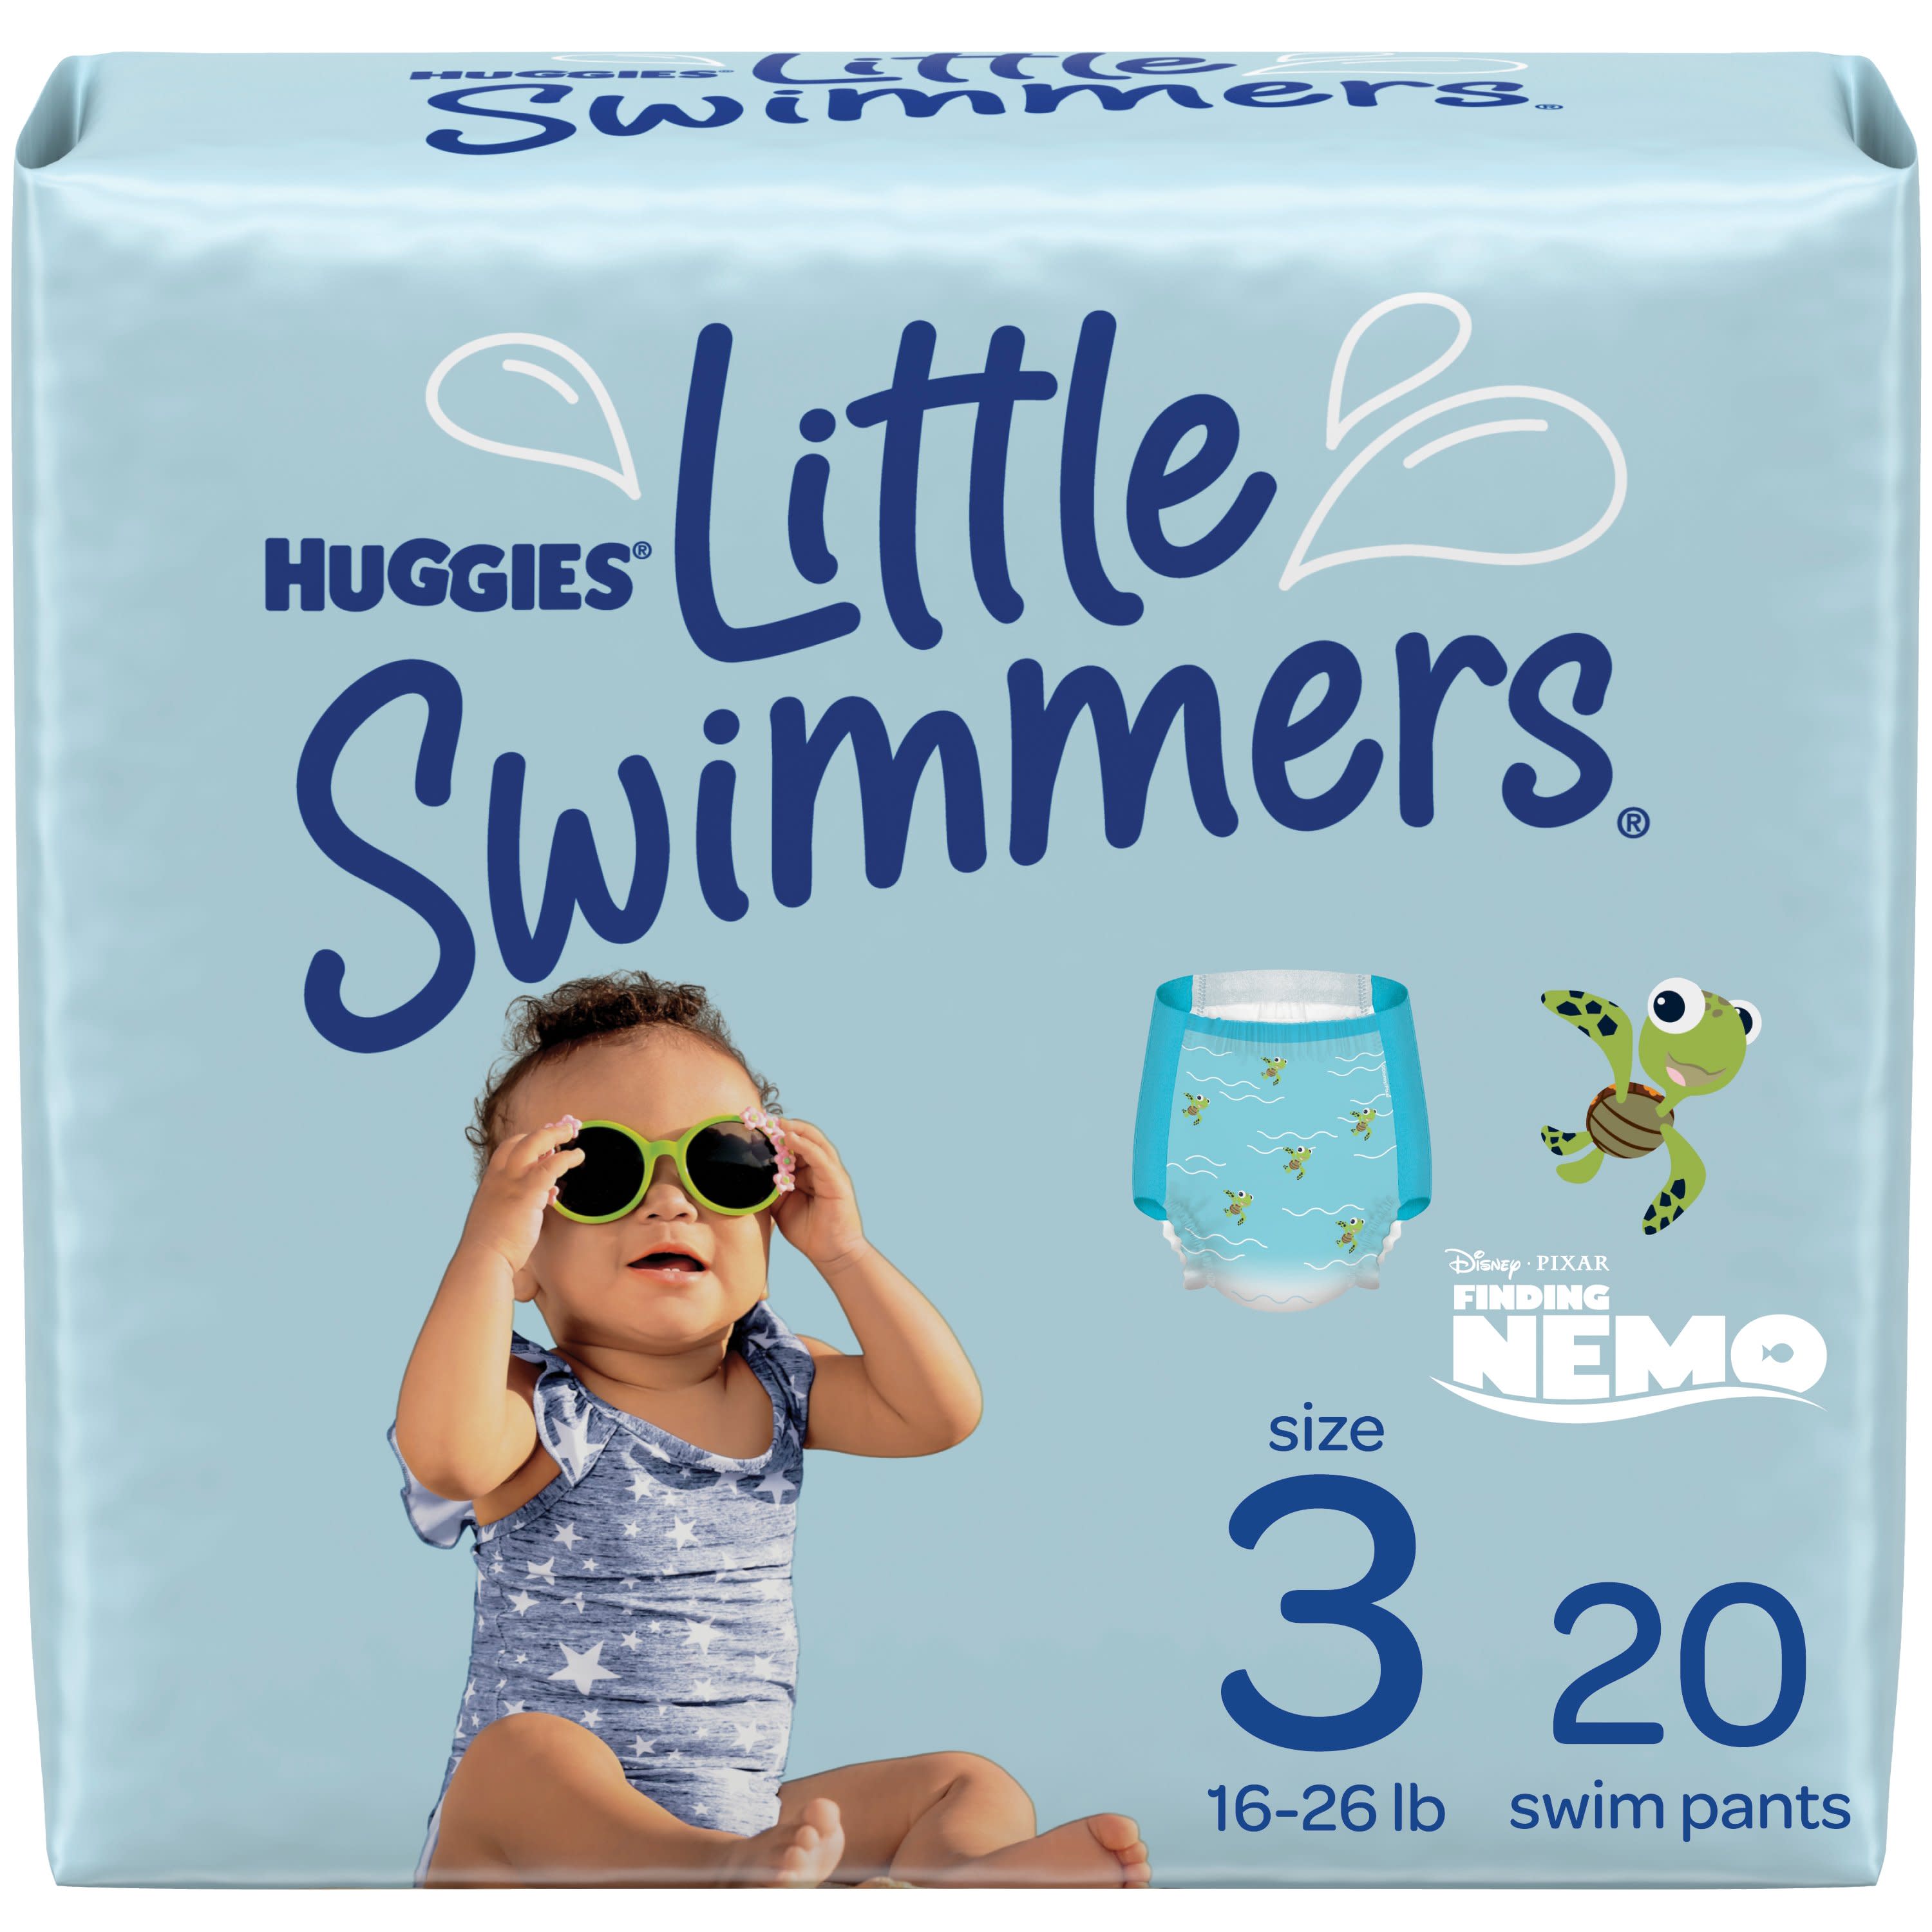 Huggies Little Swimmers Swim Diapers, Size 3, 20 Ct - image 3 of 11